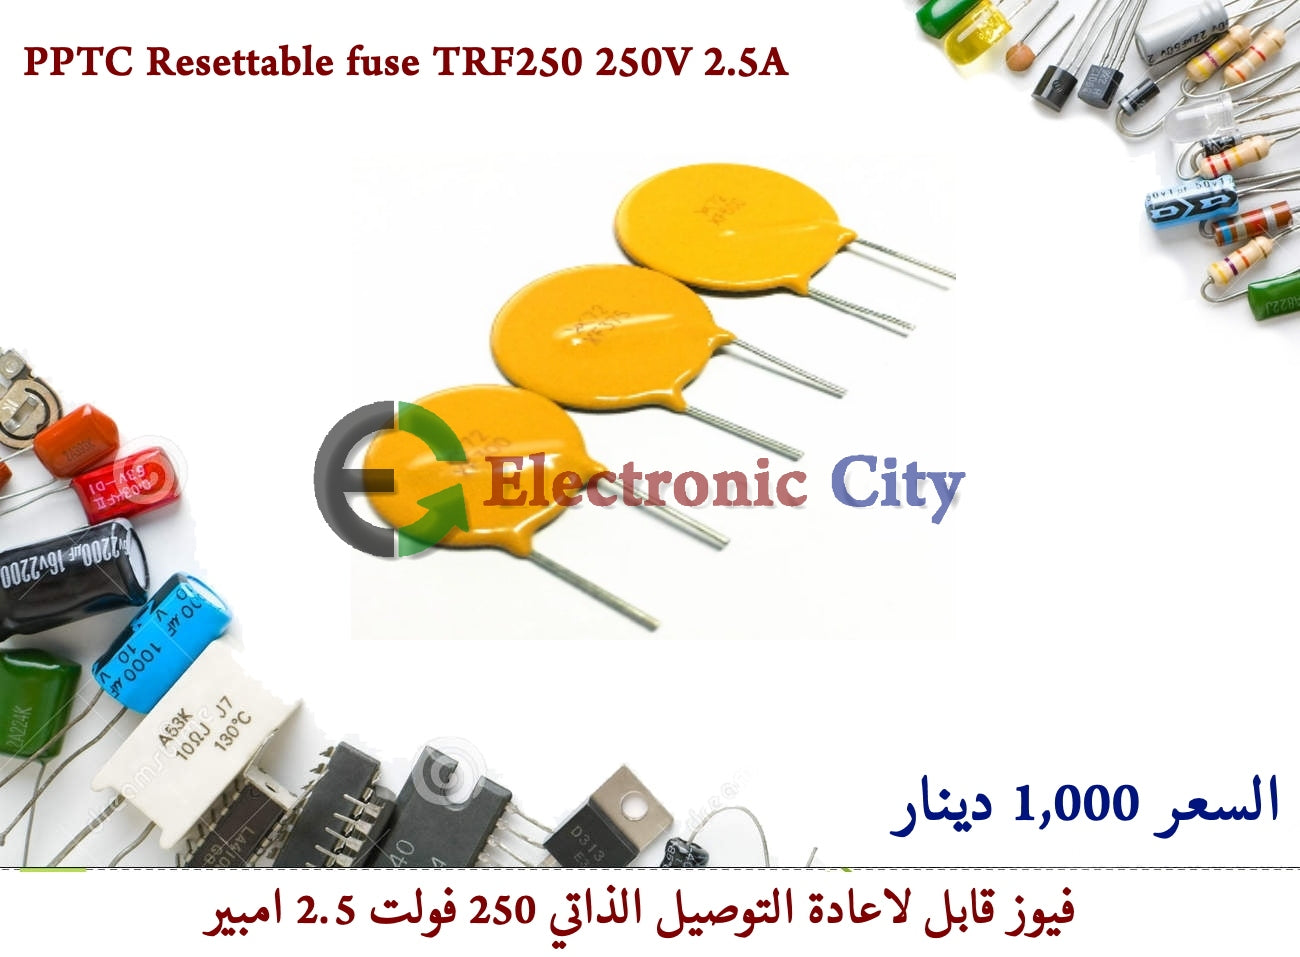 PPTC Resettable fuse TRF250 250V 2.5A